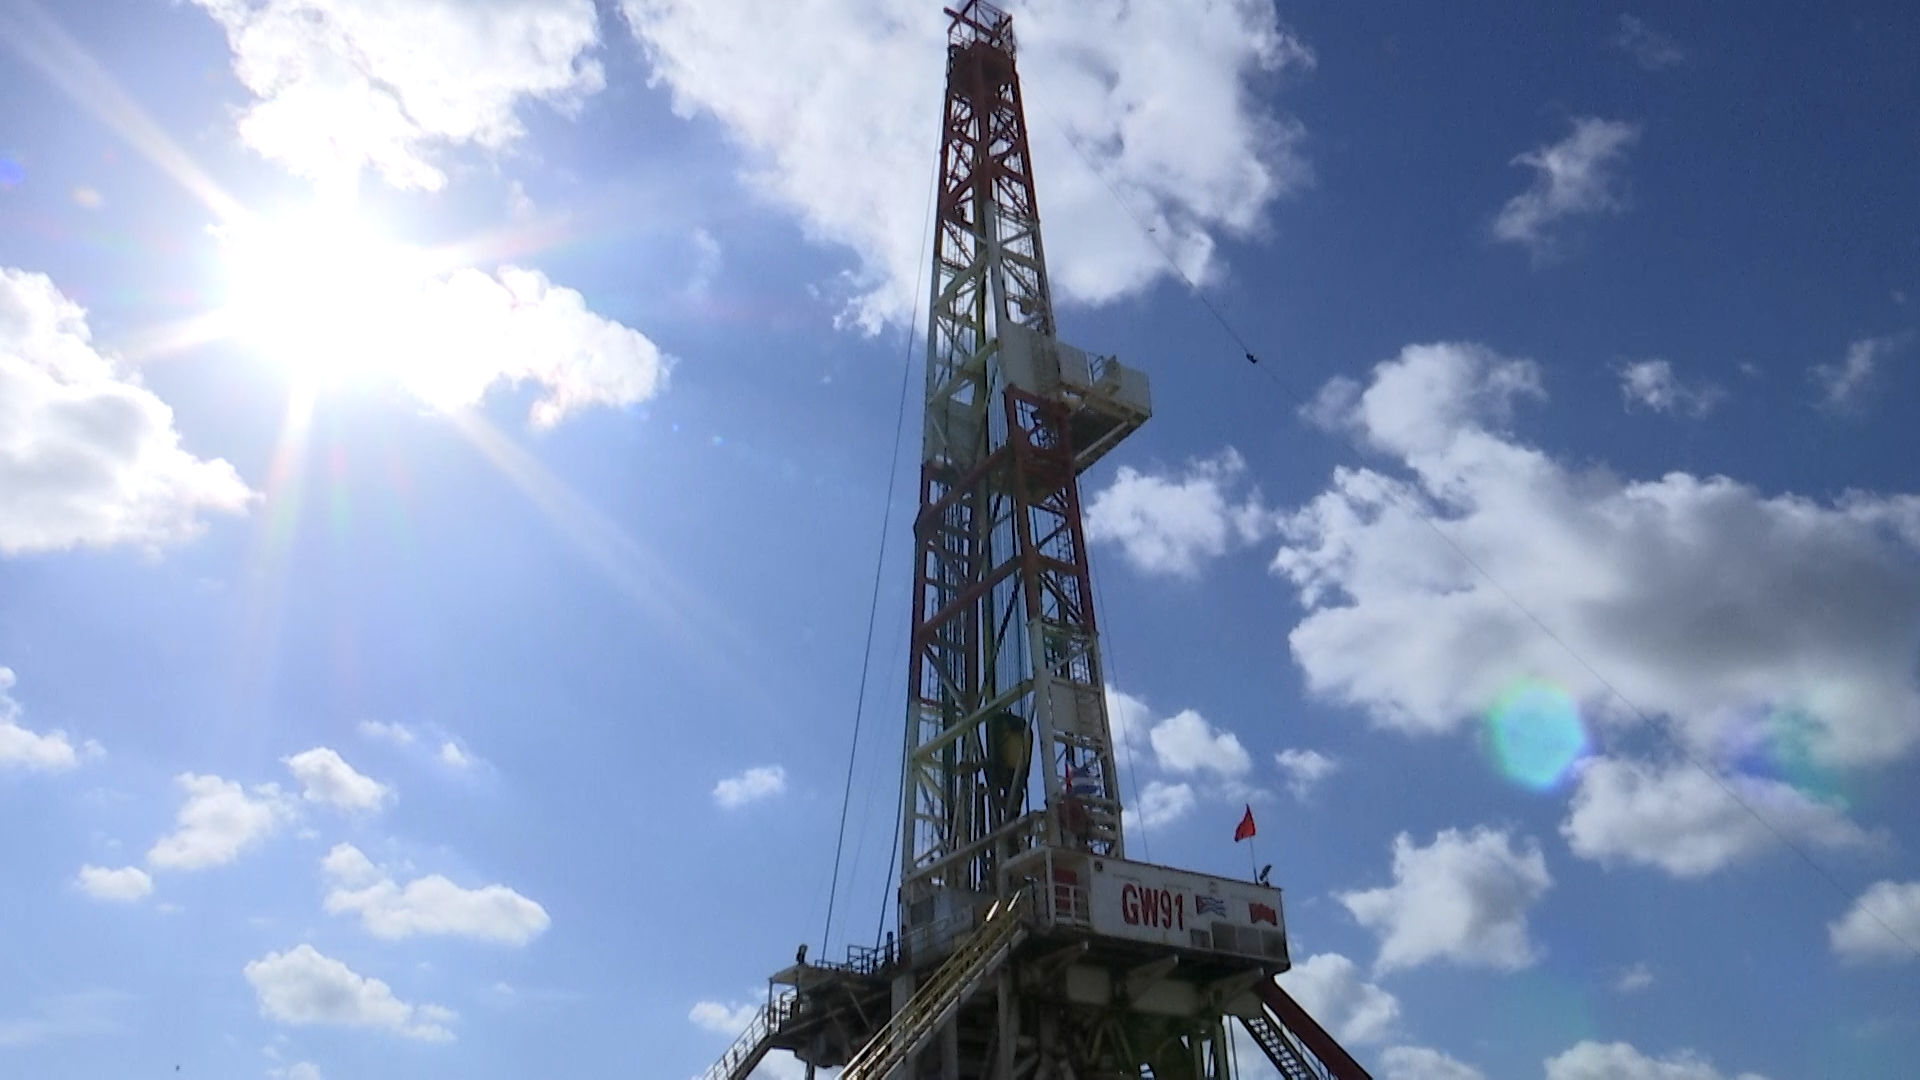 Cuba’s longest horizontal oil well completed